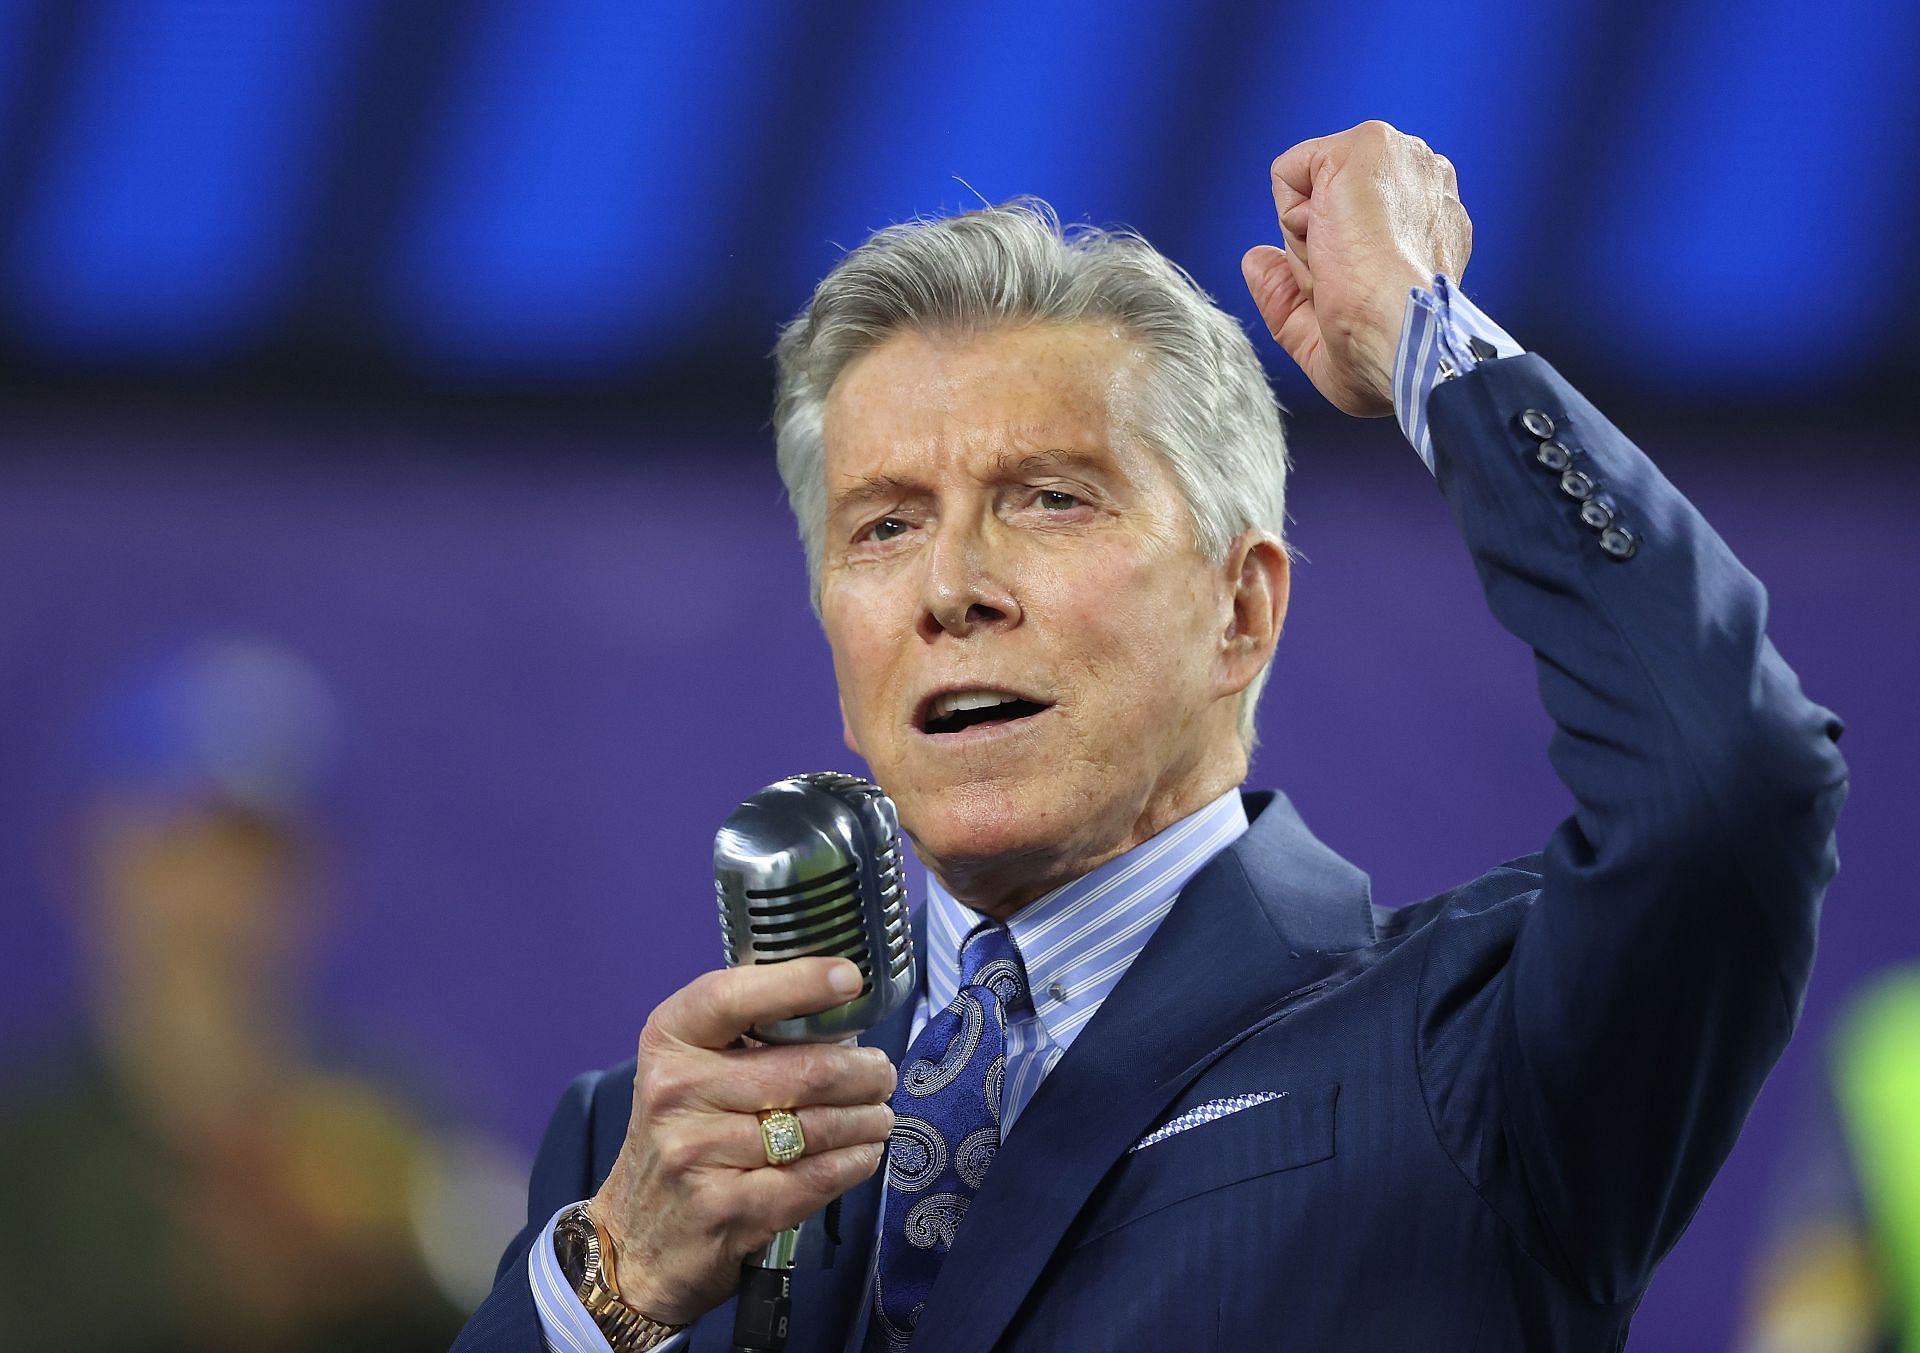 Michael Buffer at the Tennessee Titans vs. Los Angeles Rams NFL game.